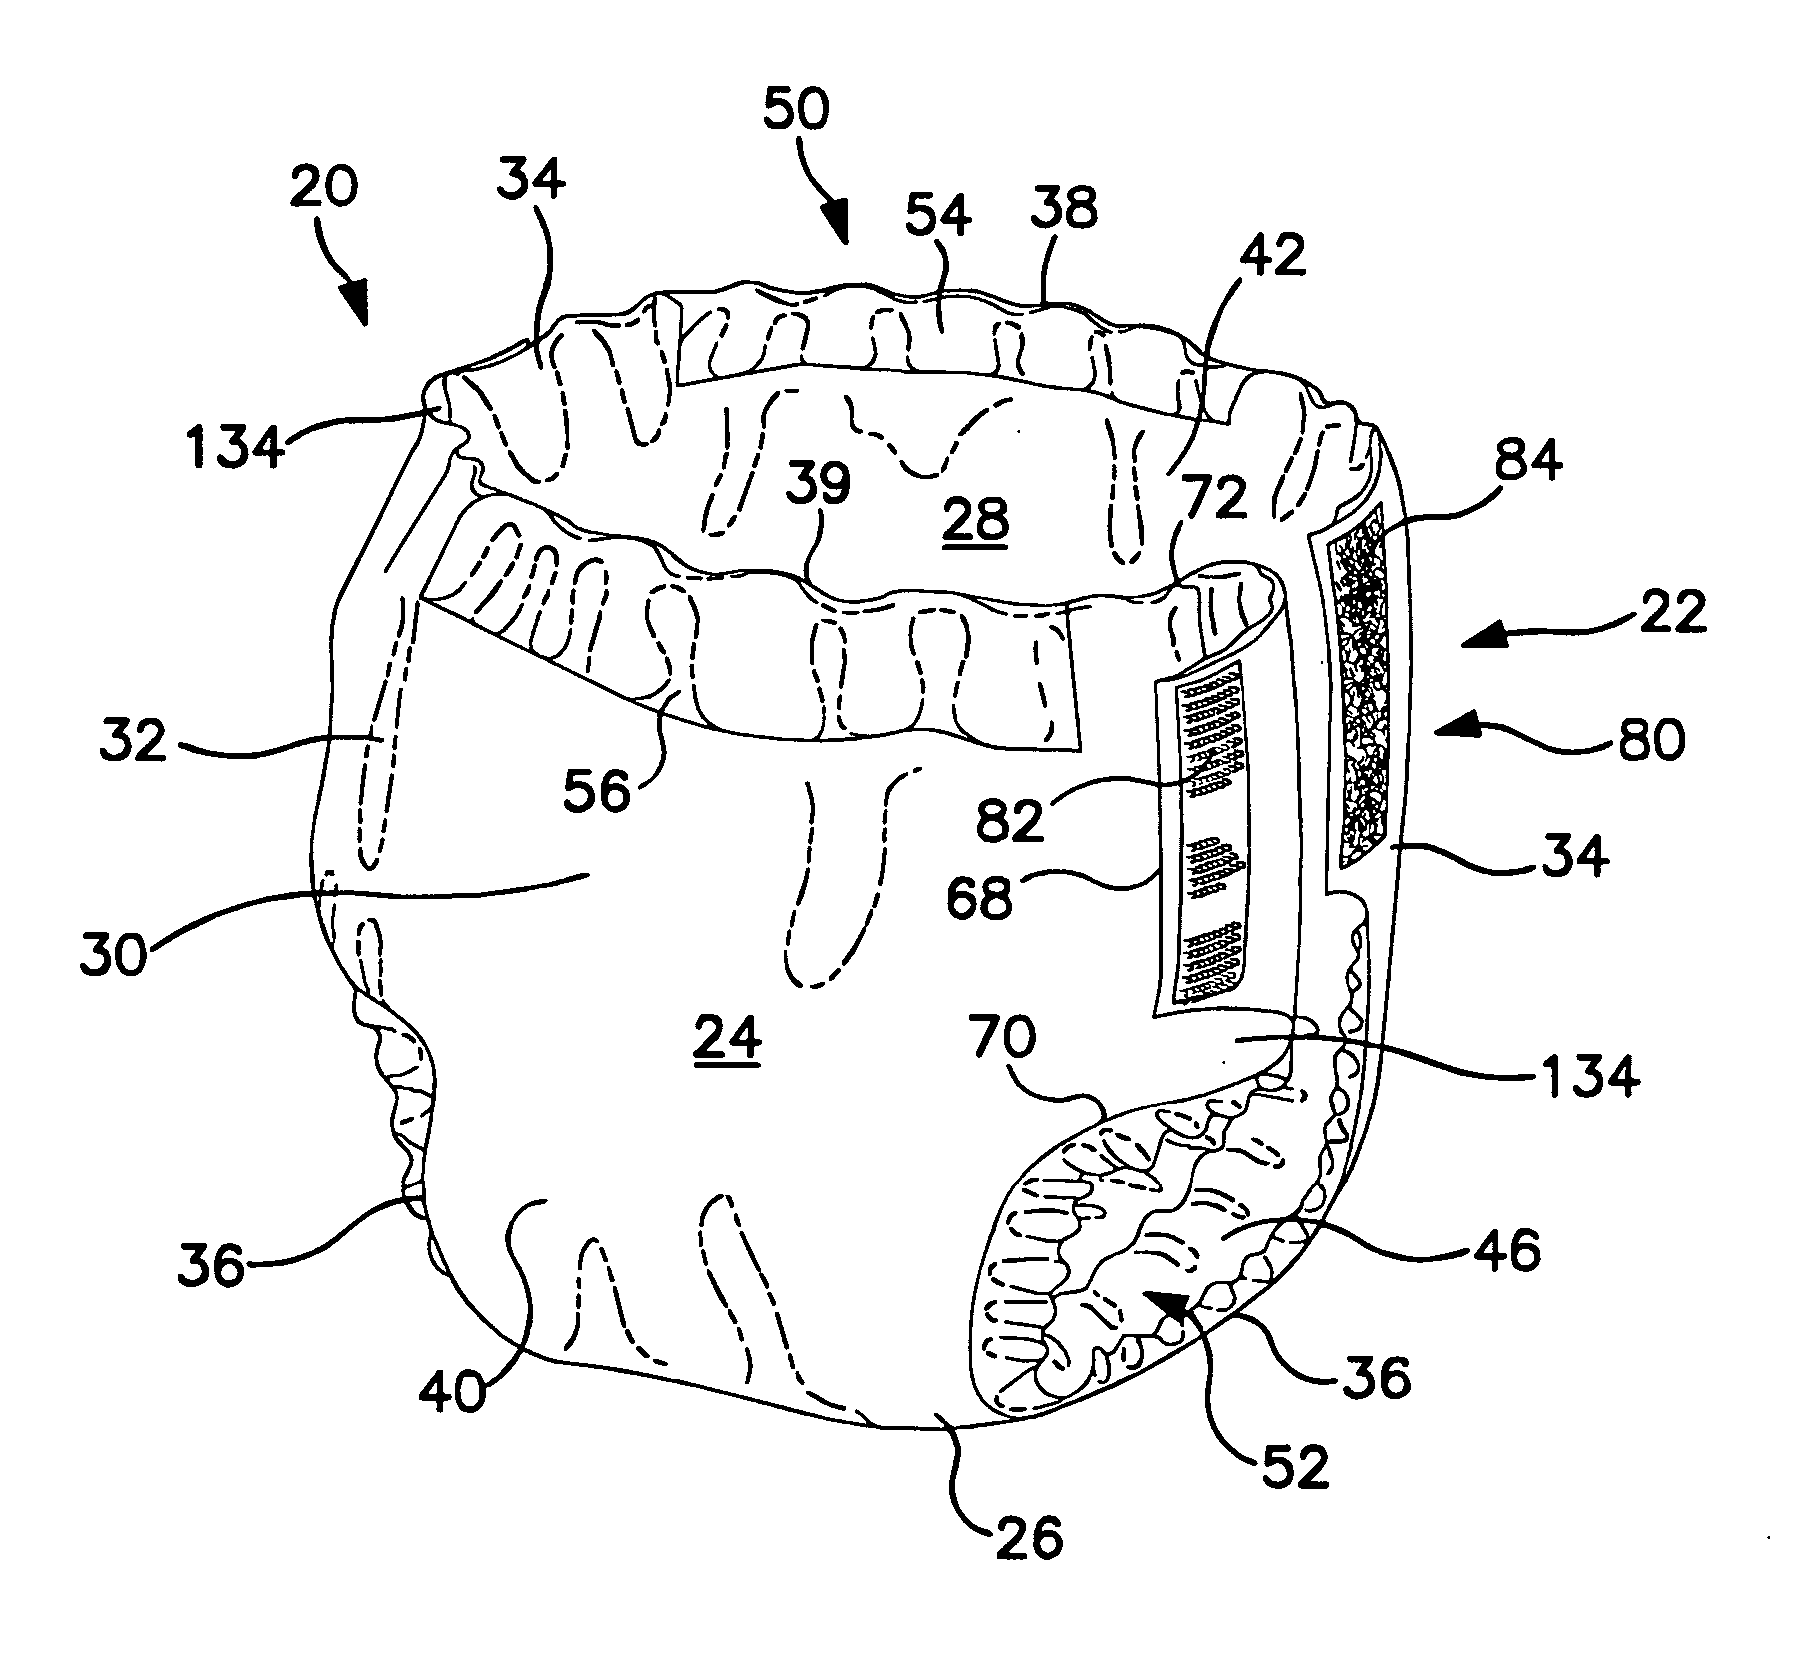 Absorbent garments with form-fitting properties